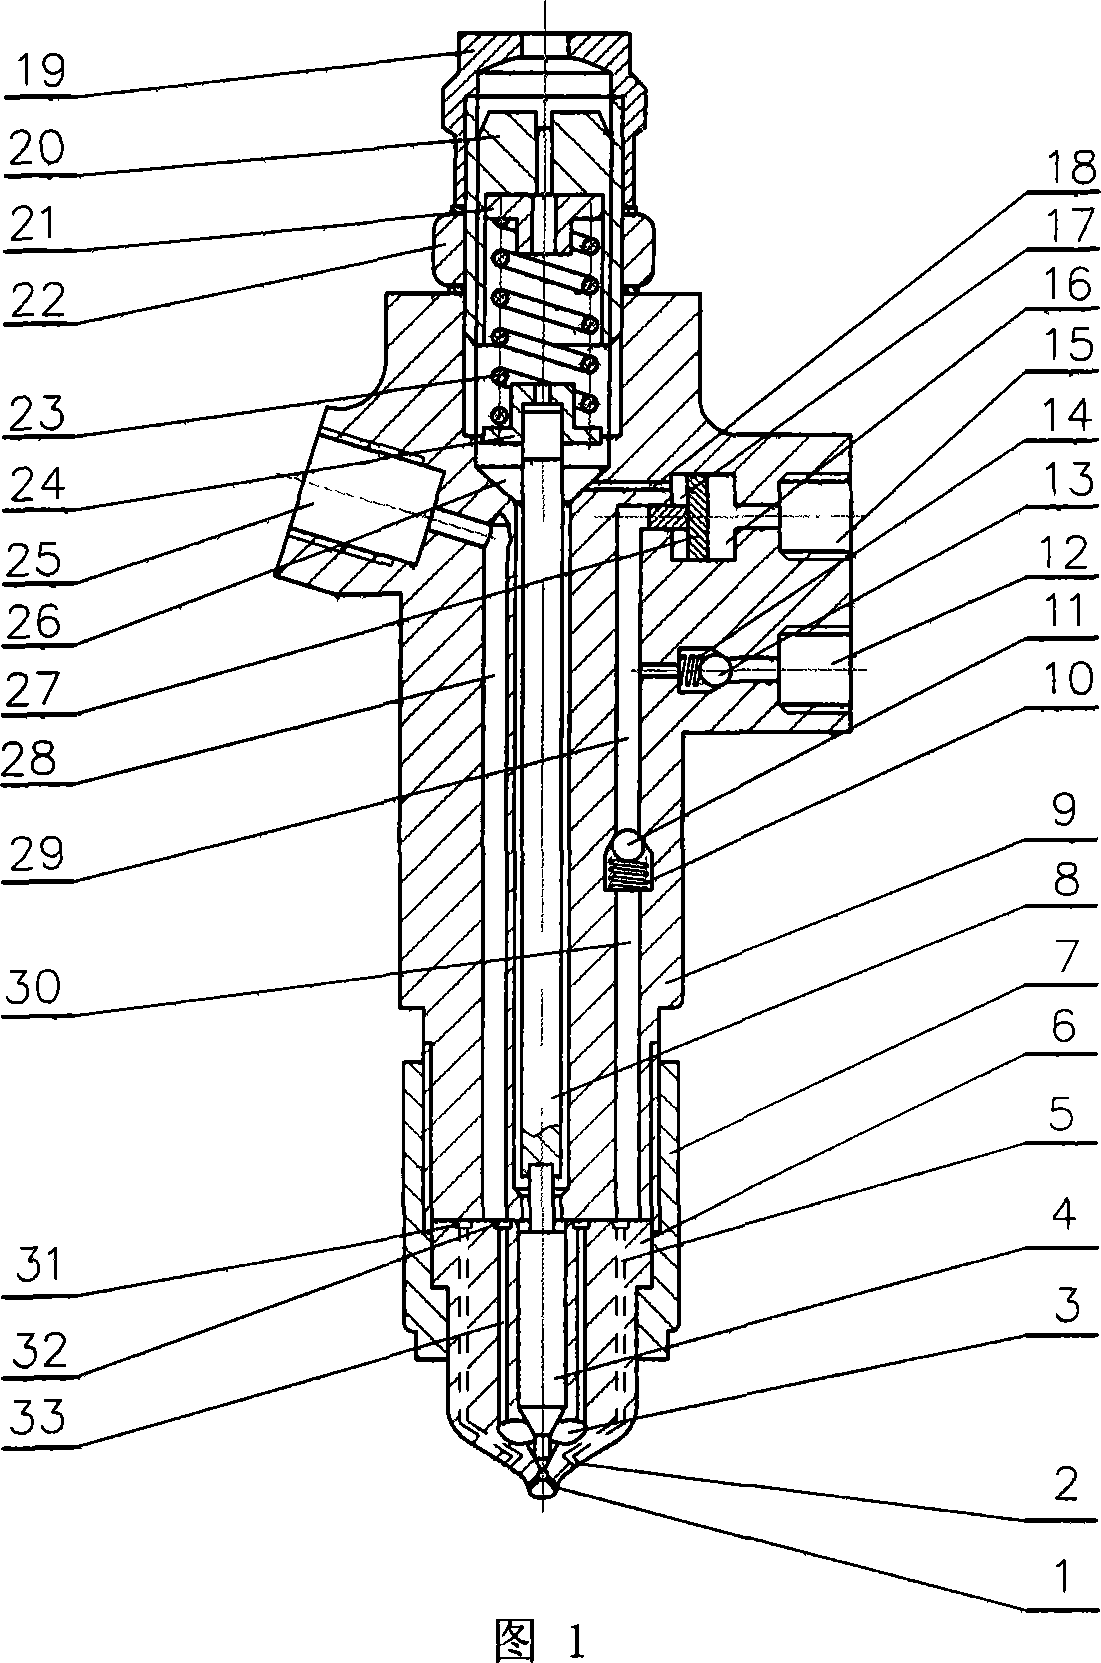 Double-layer injection fuel oil injector used for diesel oil and dimethyl ether